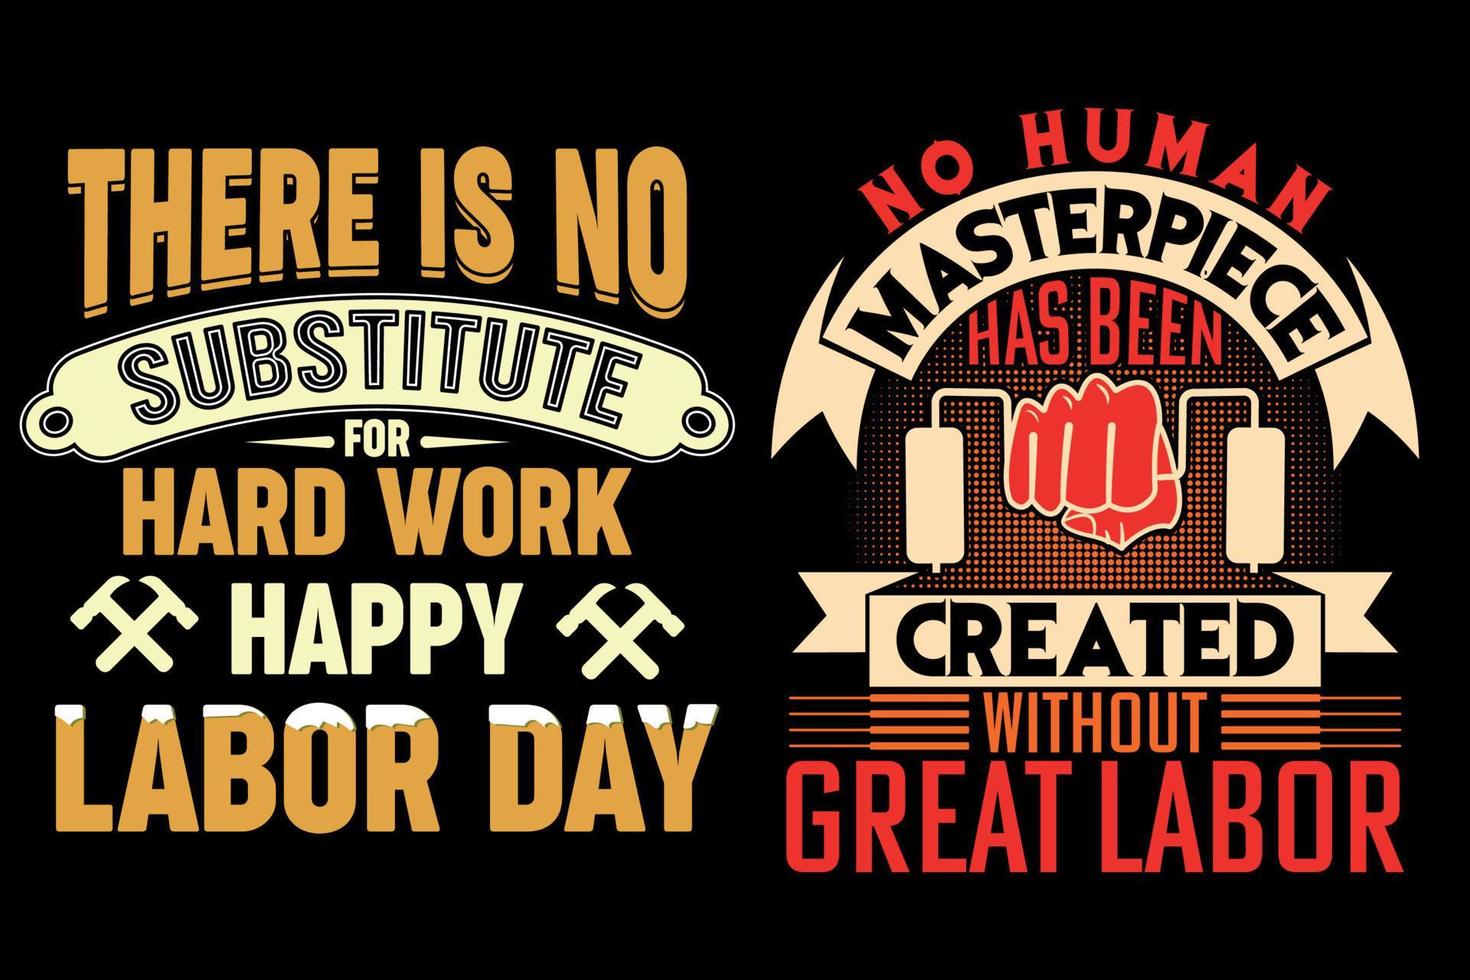 Labor Day is a holiday in the United States that honors the American labor movement and the contributions that workers have made to the country. vector